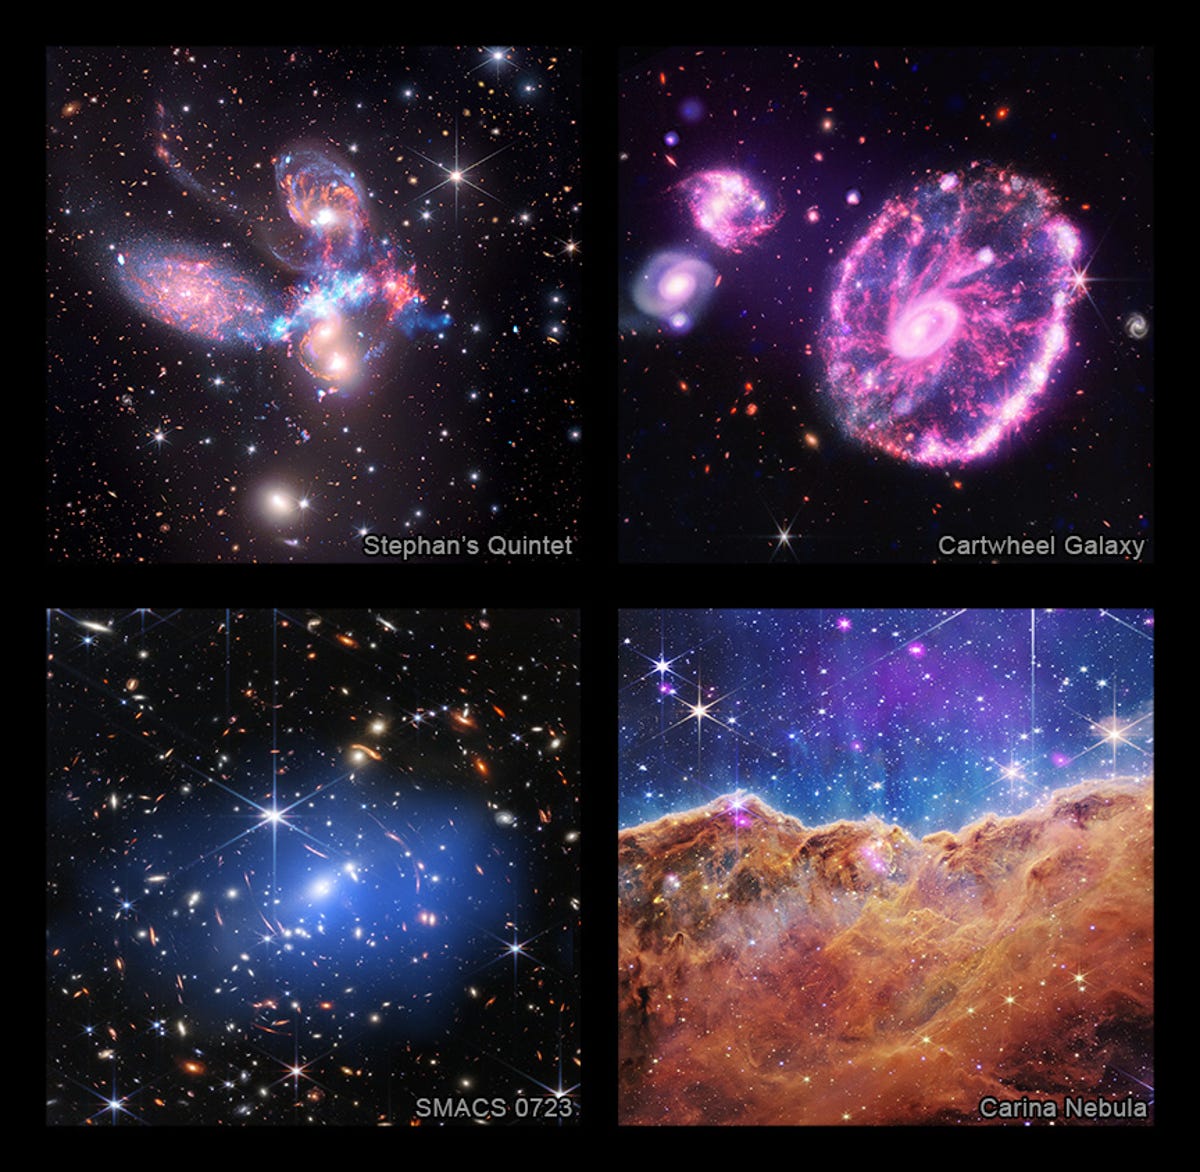 On the top left is the composite image of Stephan's Quintet, top right shows the Cartwheel Galaxy, bottom left holds Webb's First Deep Field and the bottom right has the Carina Nebula.